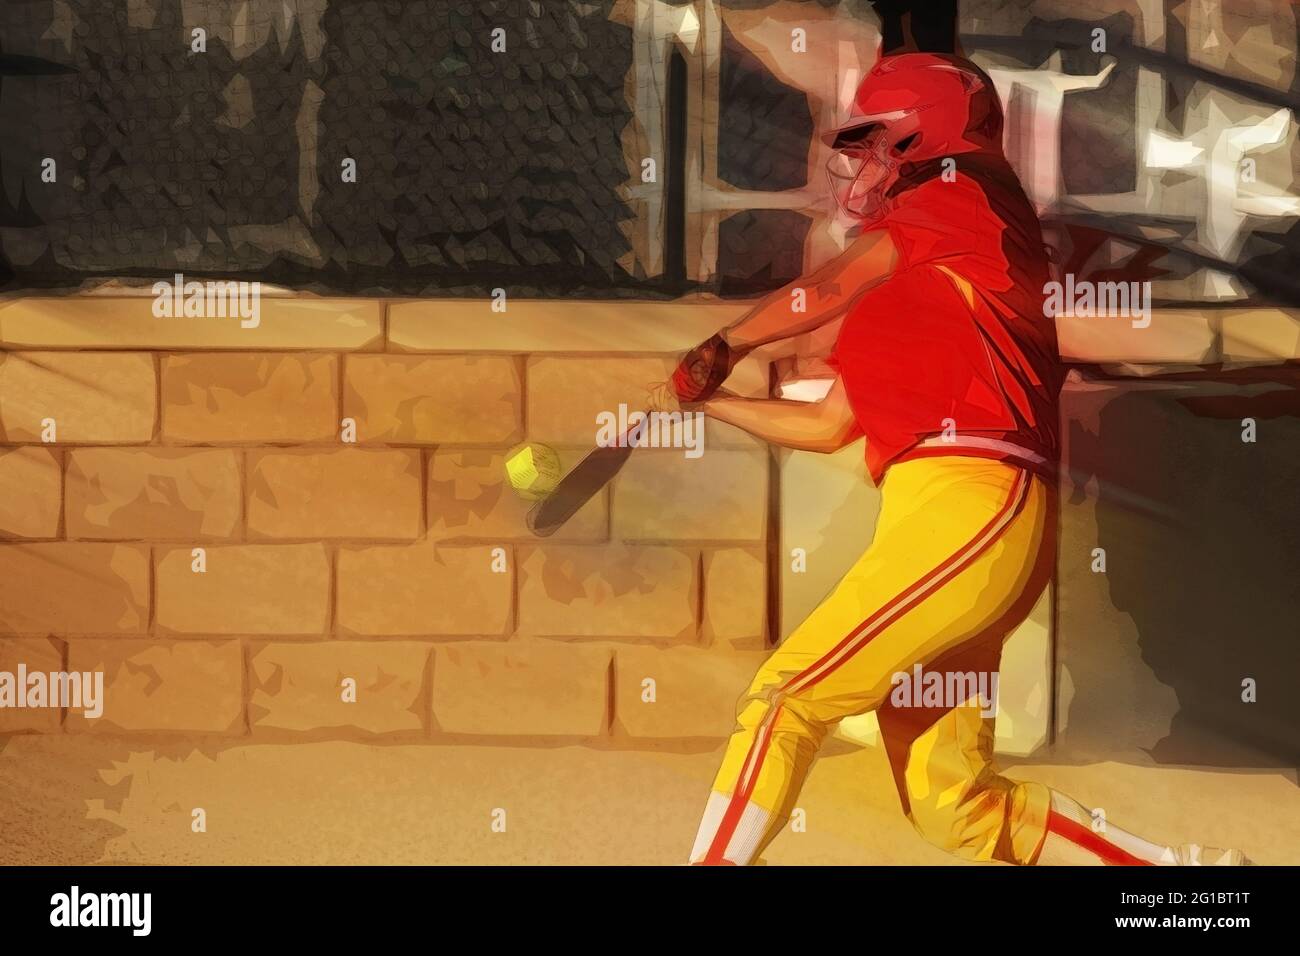 A photo illustration of a female softball player in the batters box. Stock Photo